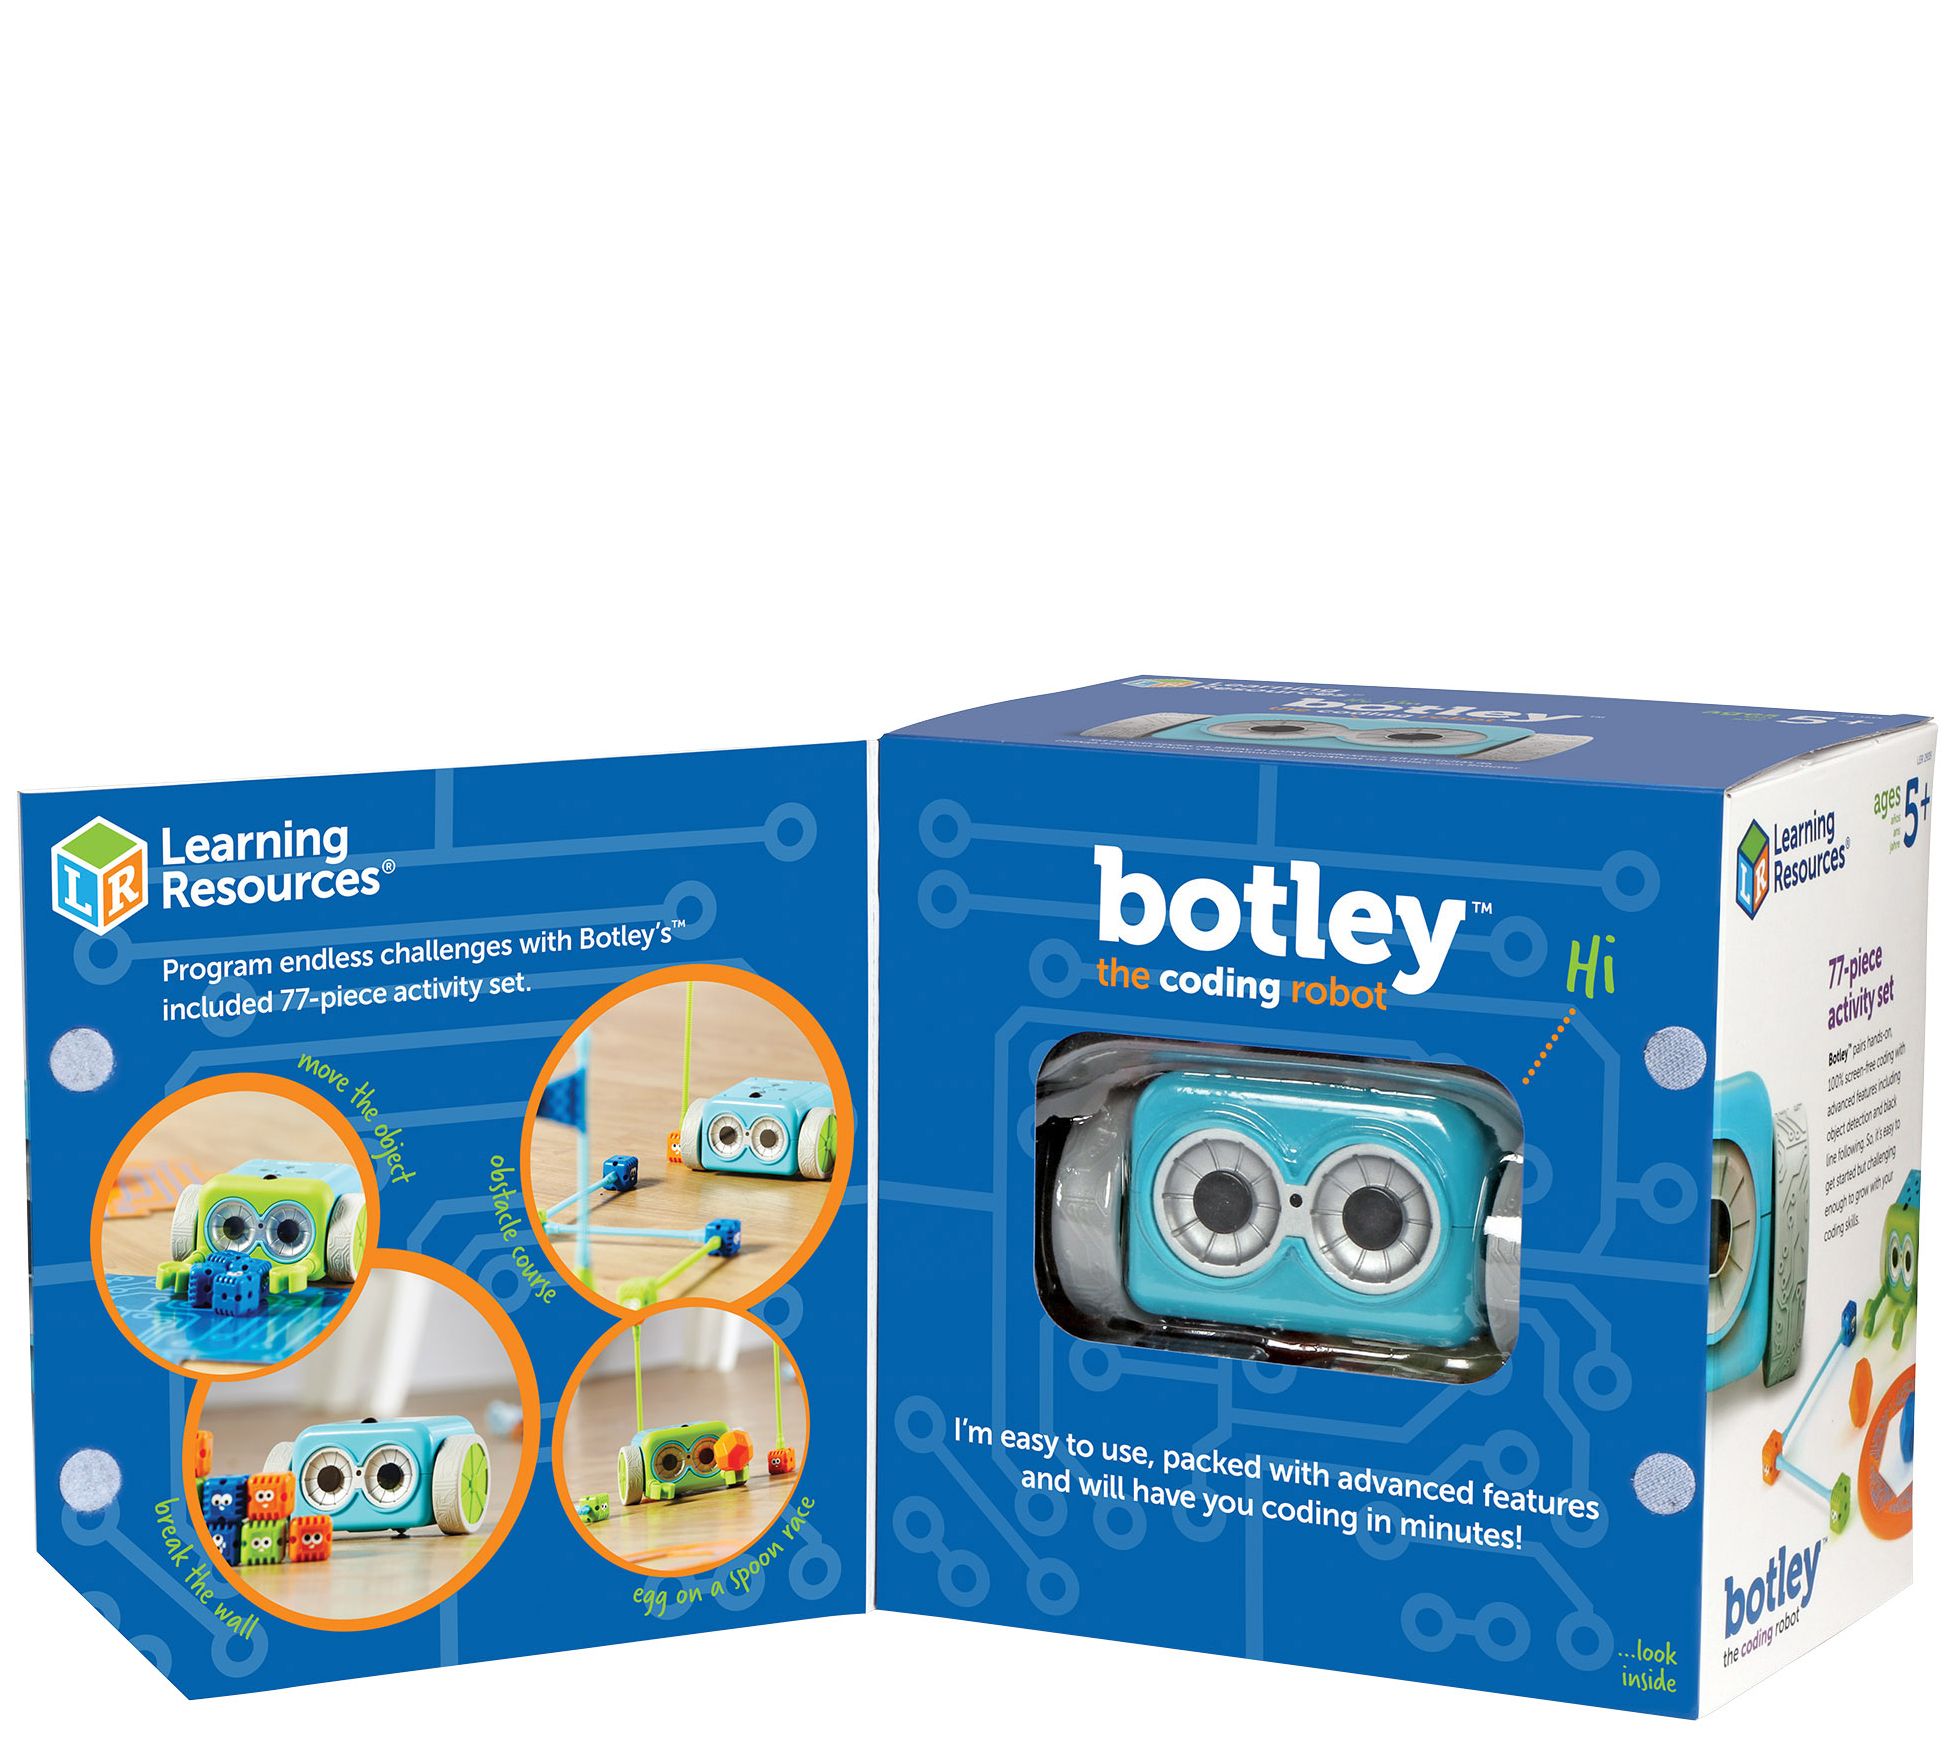 Botley activities #1: Accessible robot and coding concepts